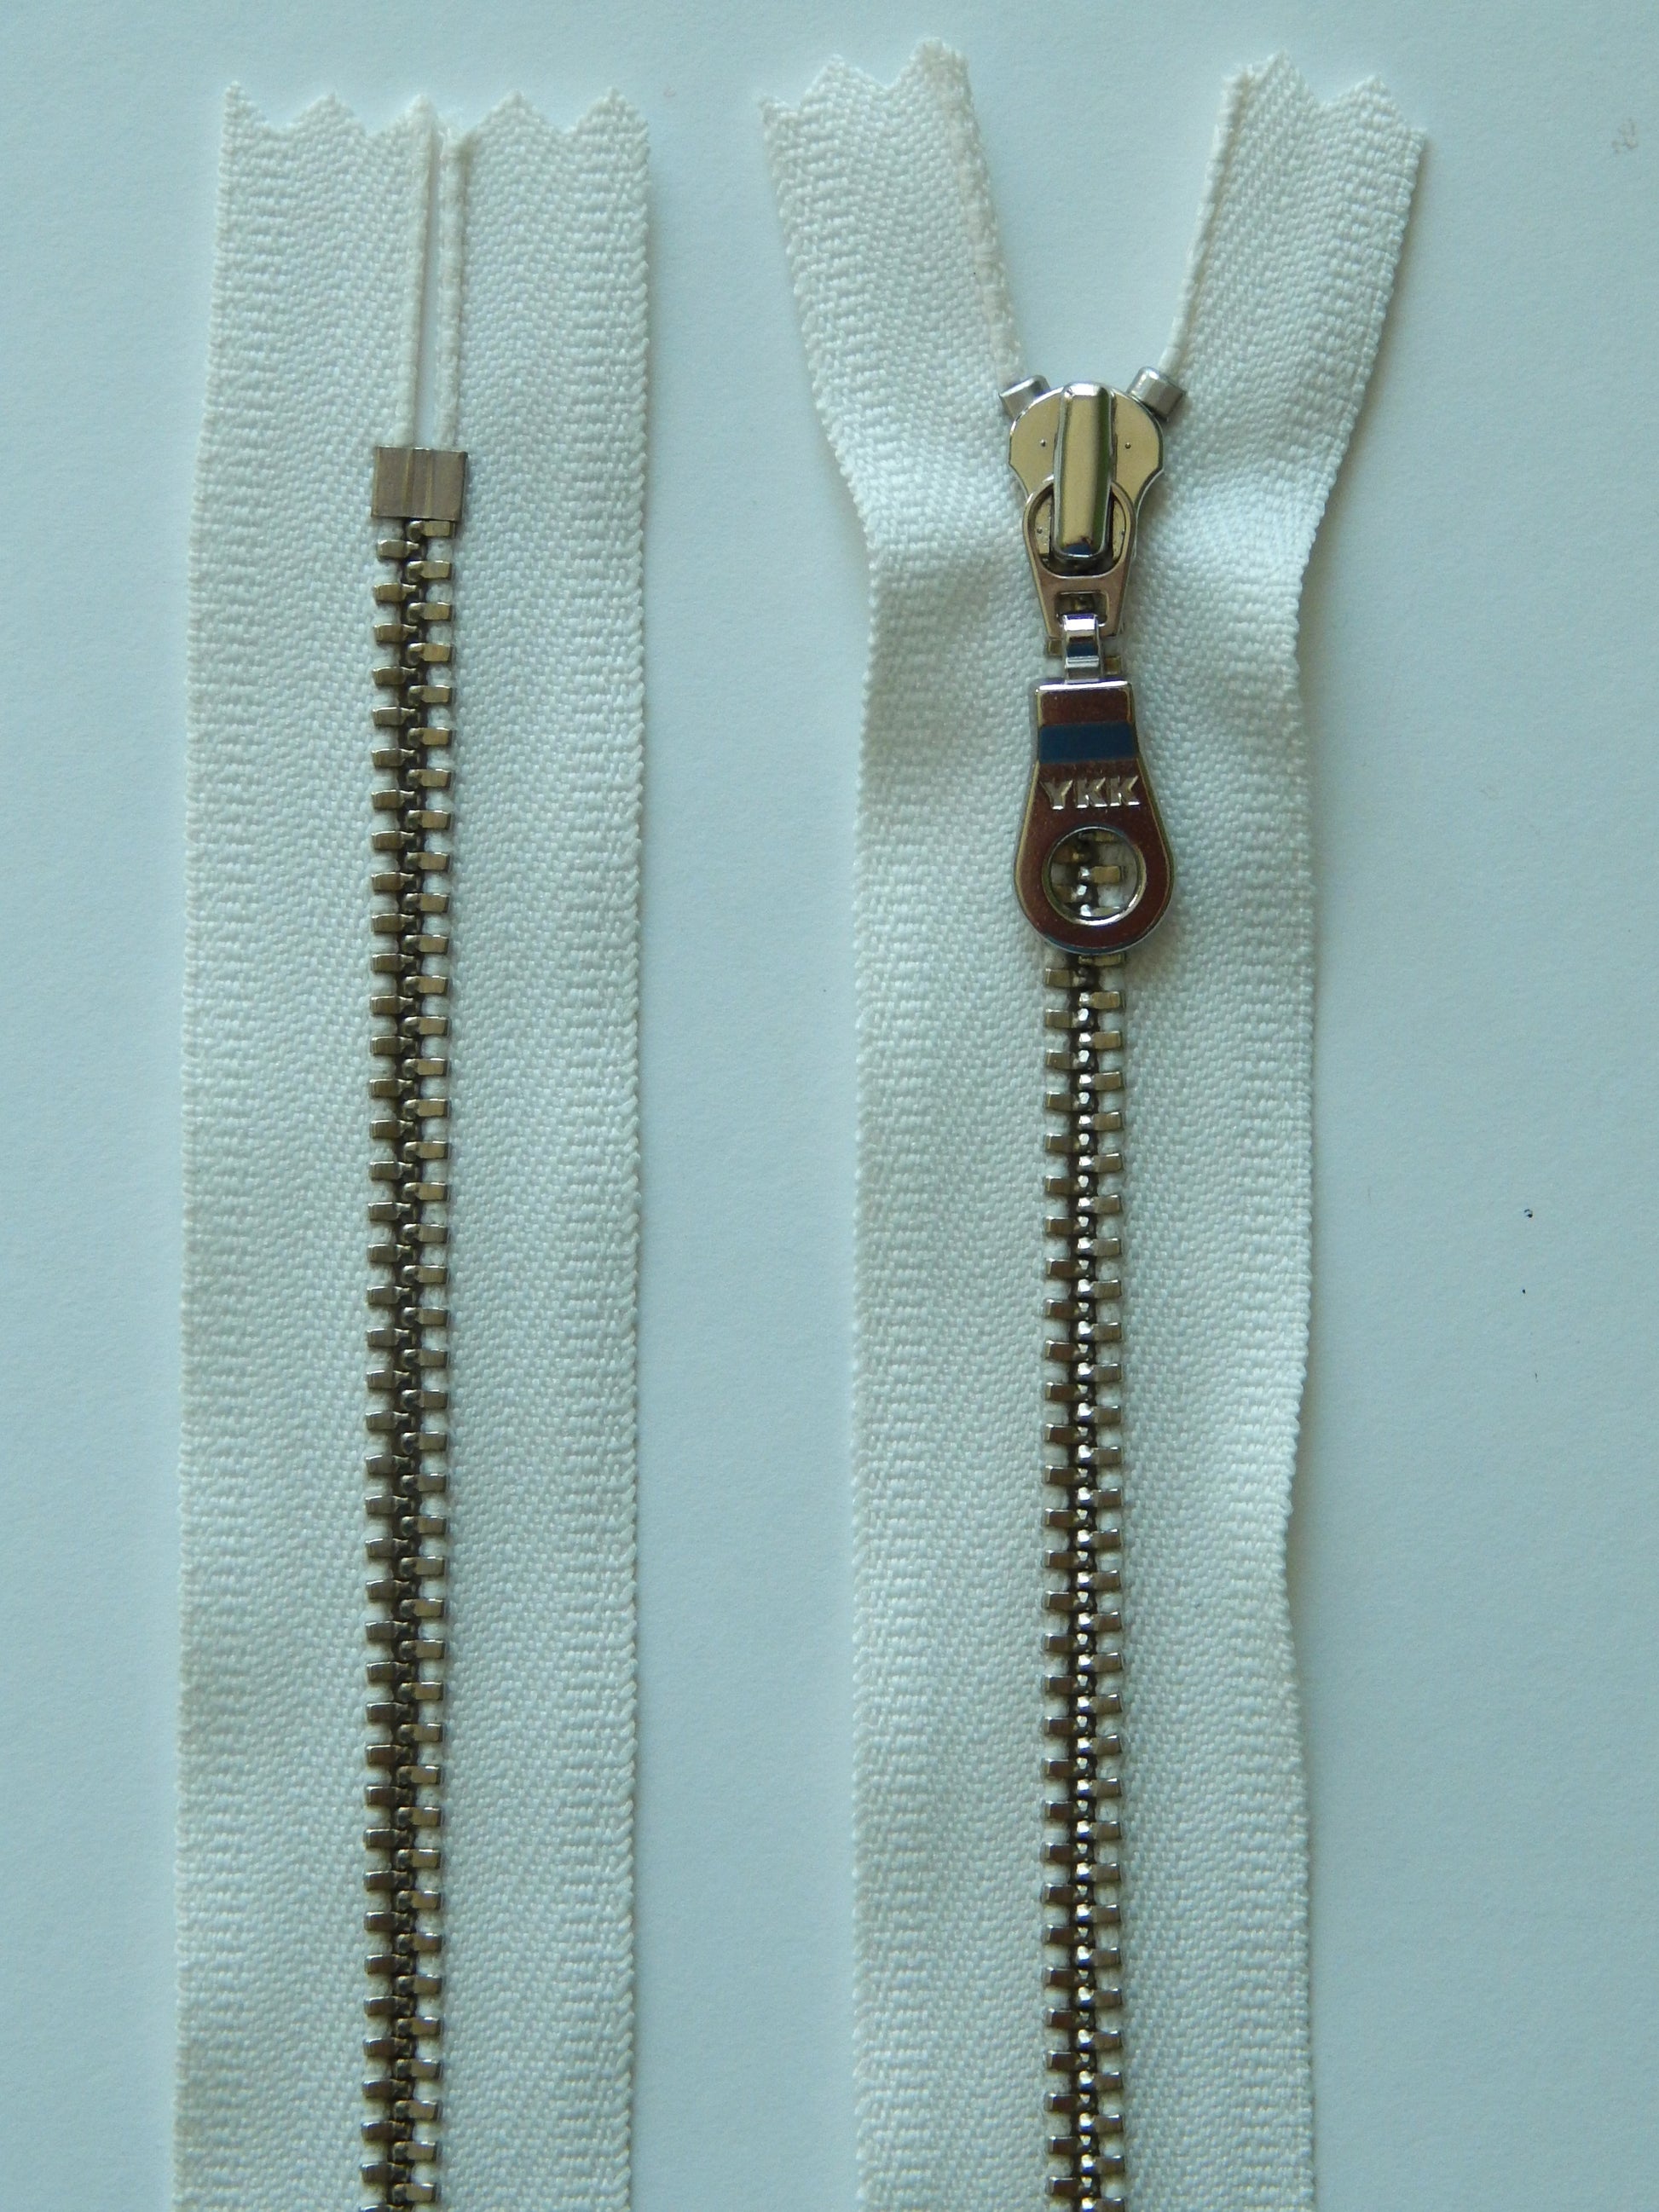 white and silver nonseparating zipper